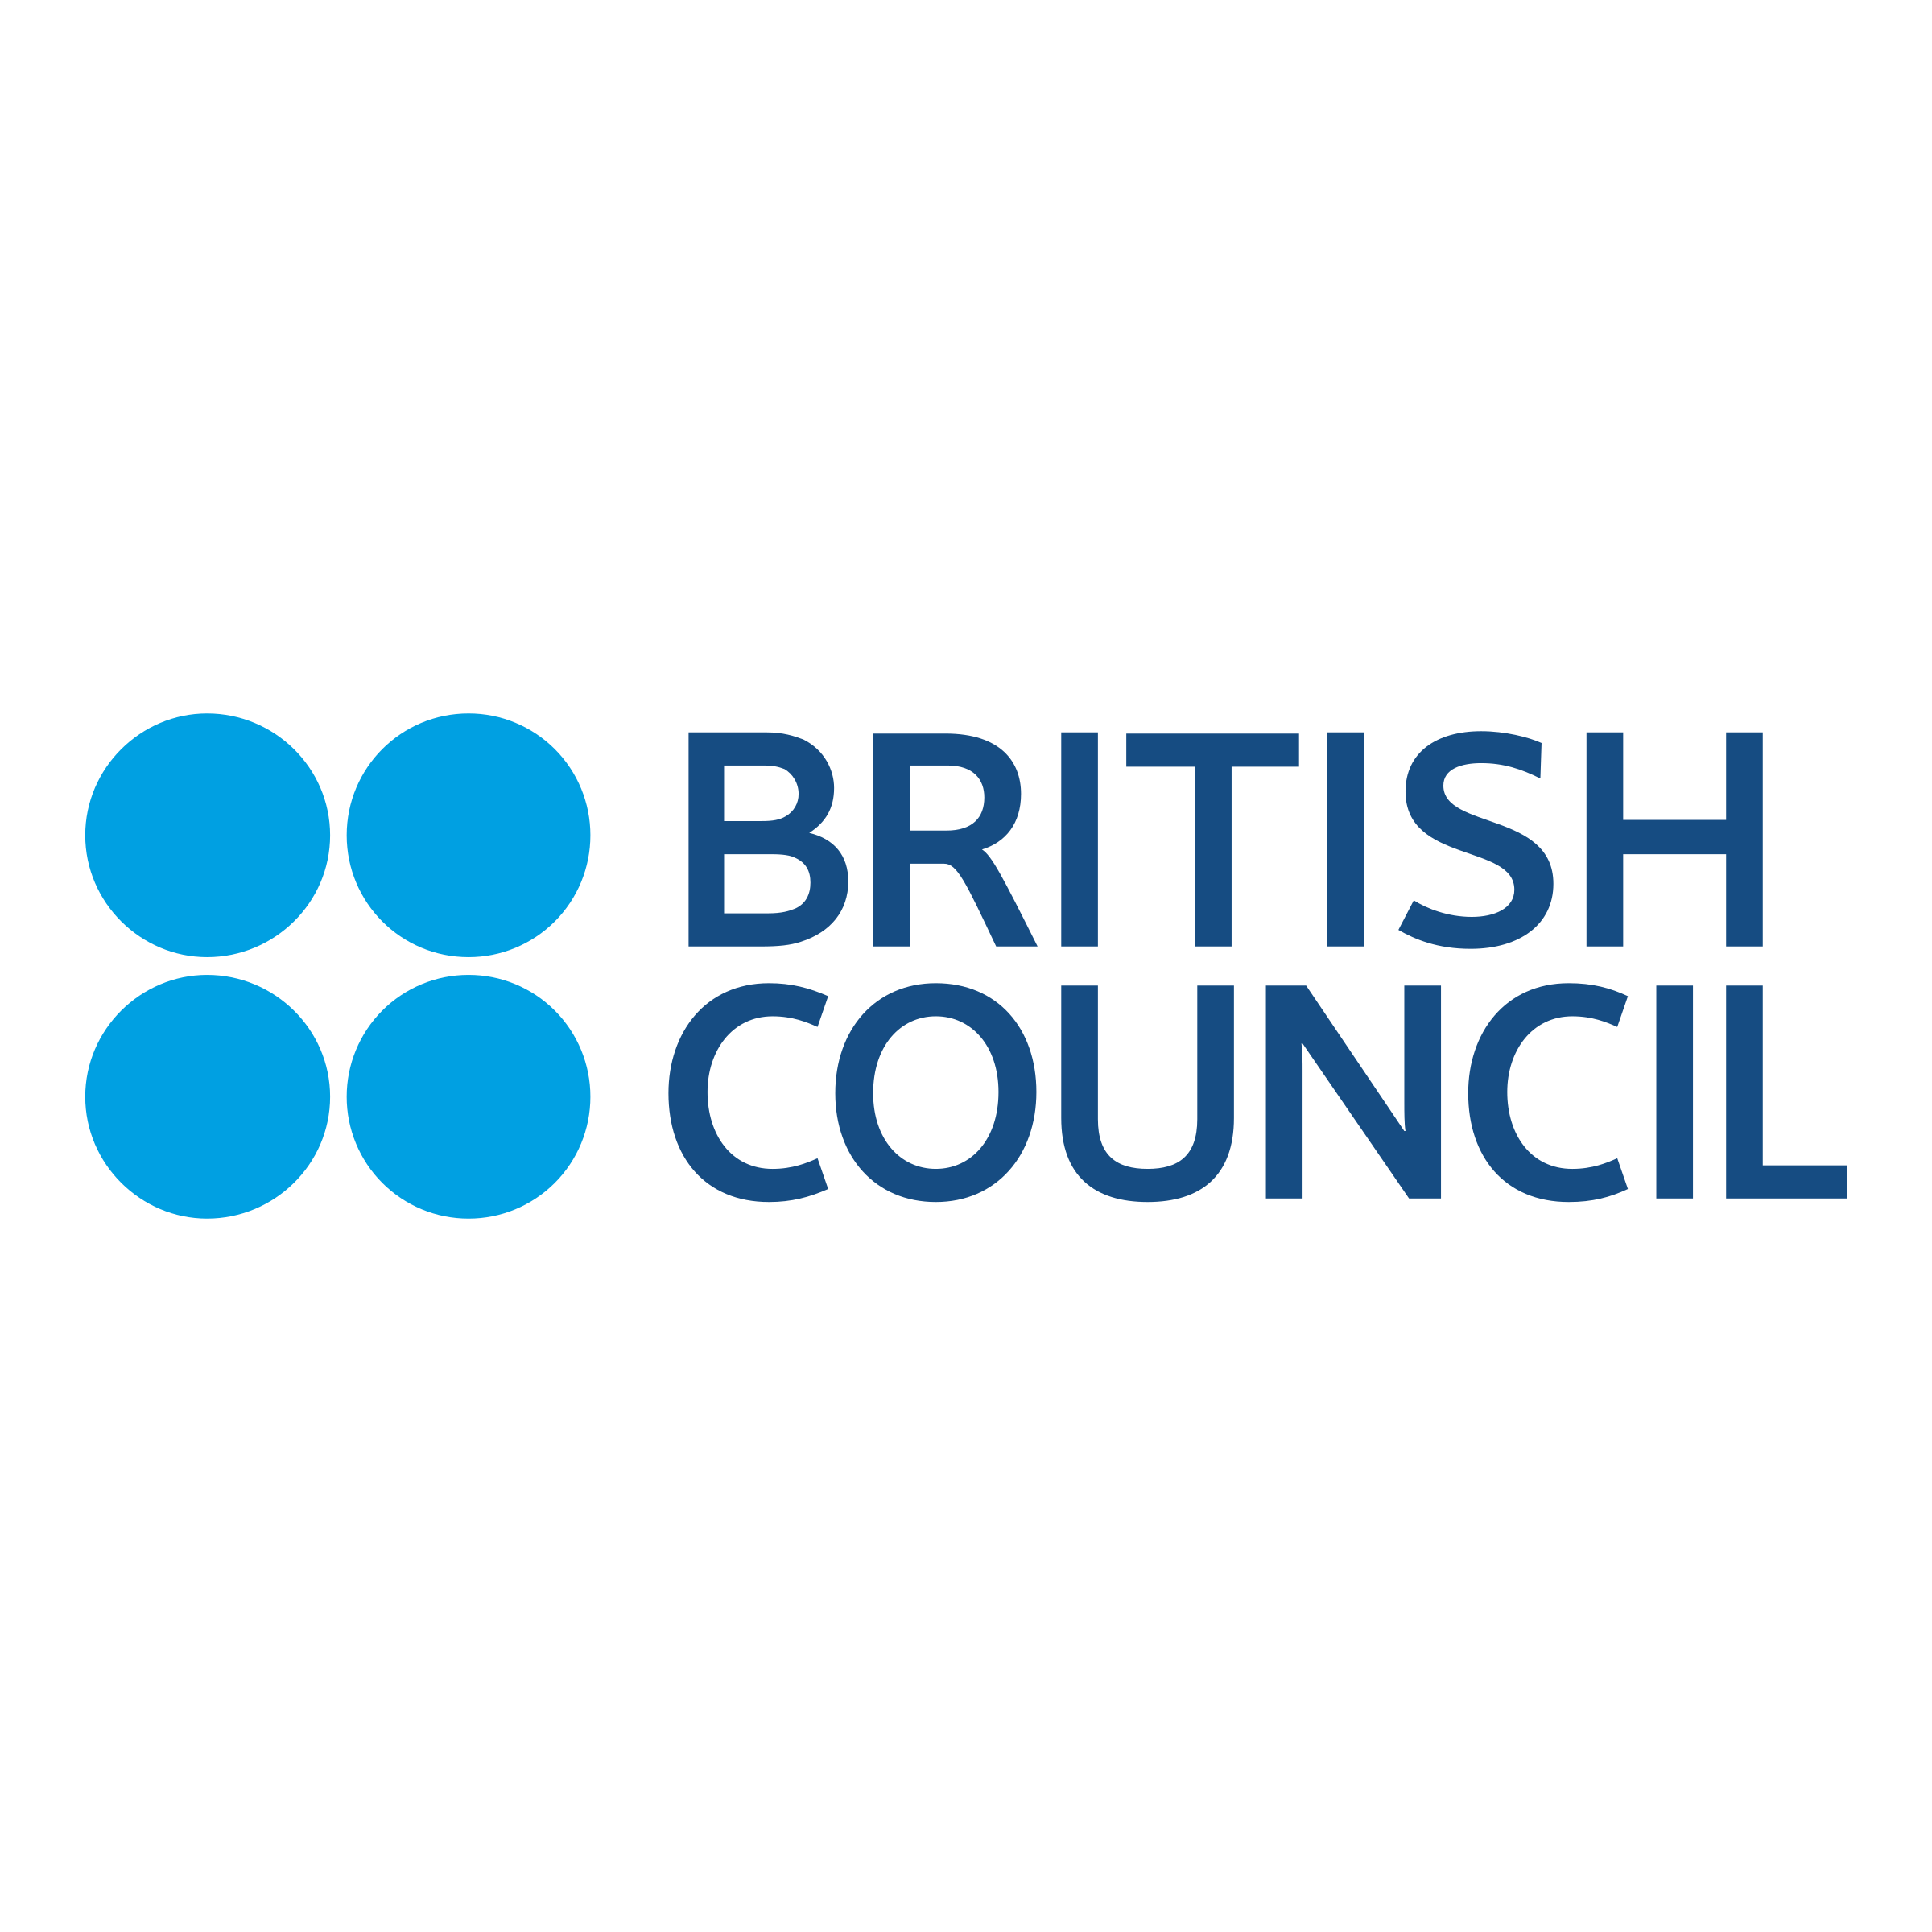 Online Self-Study Course - English Online (British Council)